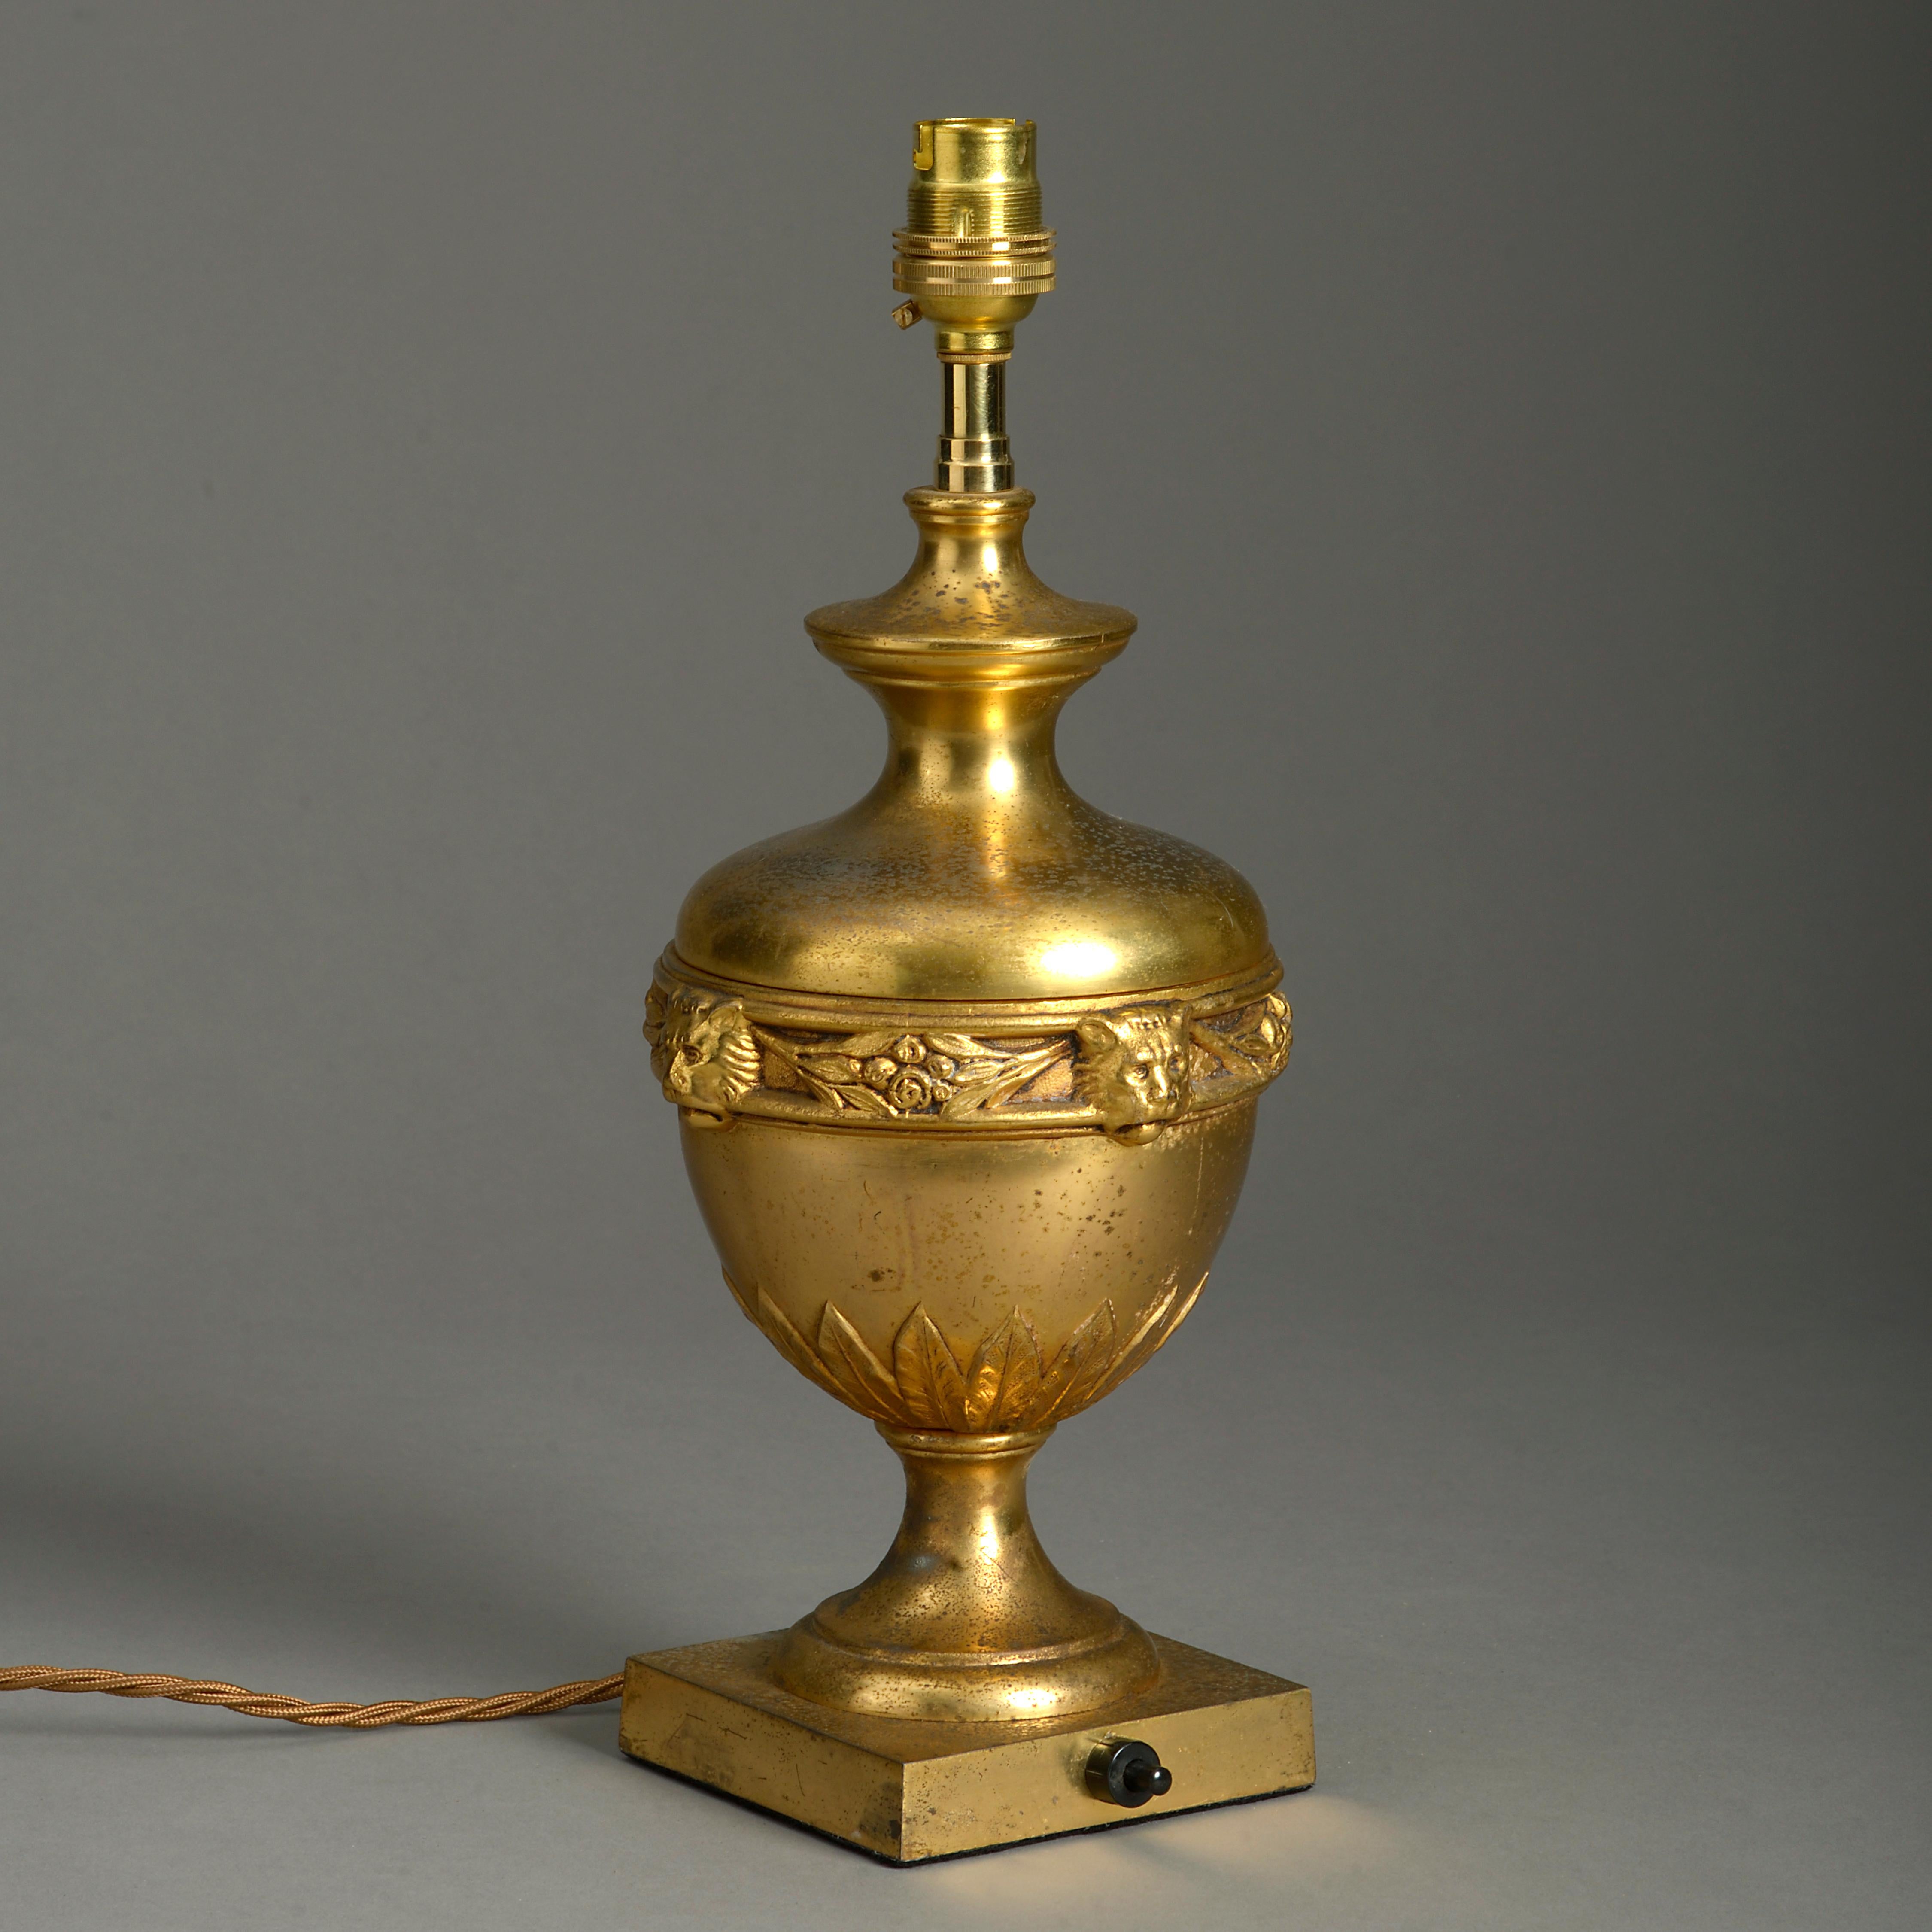 An early 20th century gilt metal urn, having a central band of lion masks articulated with floral swags above palmettes and raised upon a square plinth.

Now wired as a table lamp.

Dimensions refer to vase only and do not include electrical